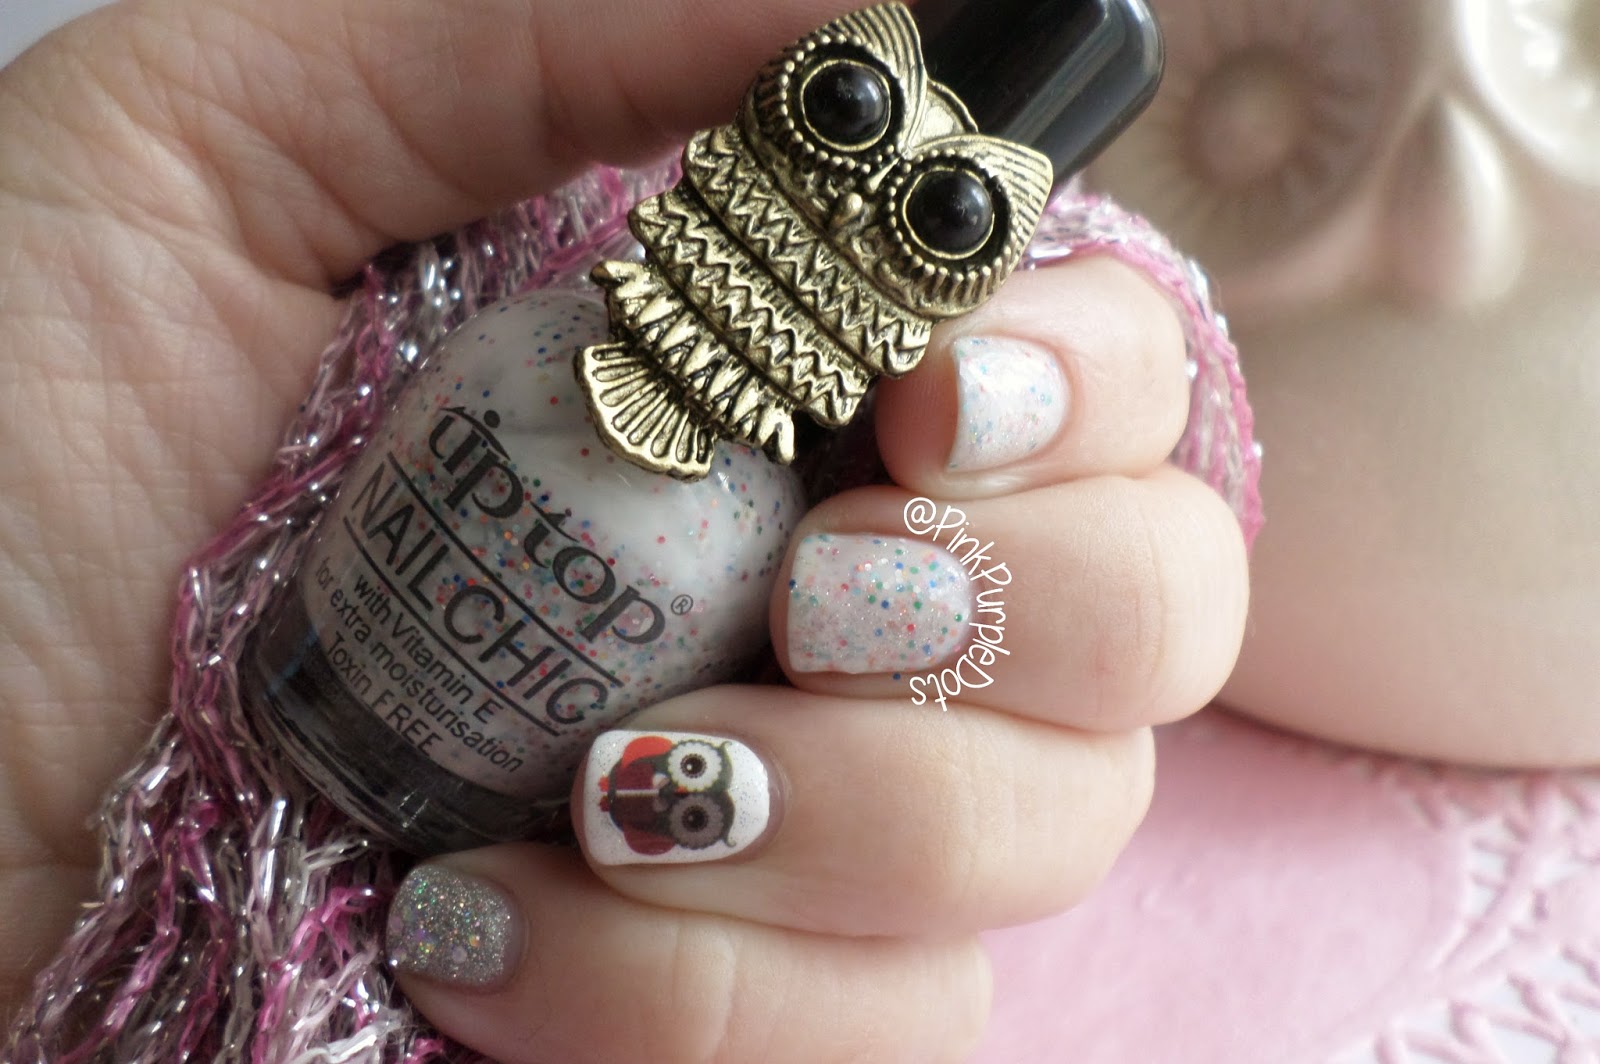 Clare Bowman, Jamberry Nails Independent Consultant